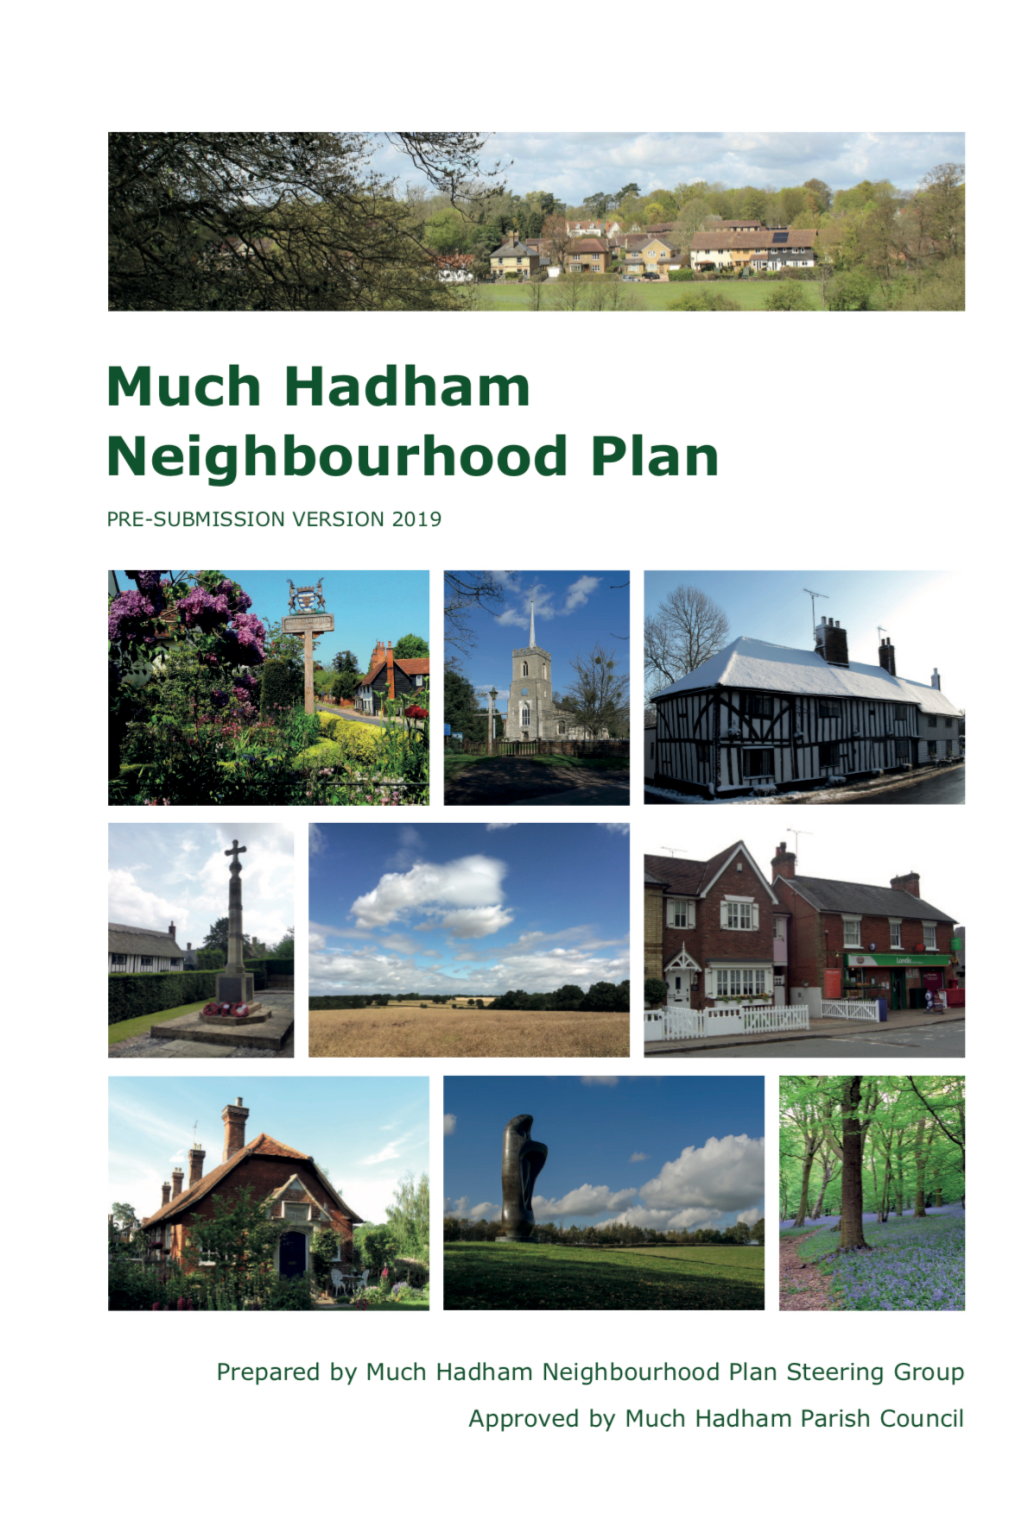 Much Hadham Neighbourhood Plan Sets out a Community Vision for How the Parish of Much Hadham Will Develop in the Coming Years